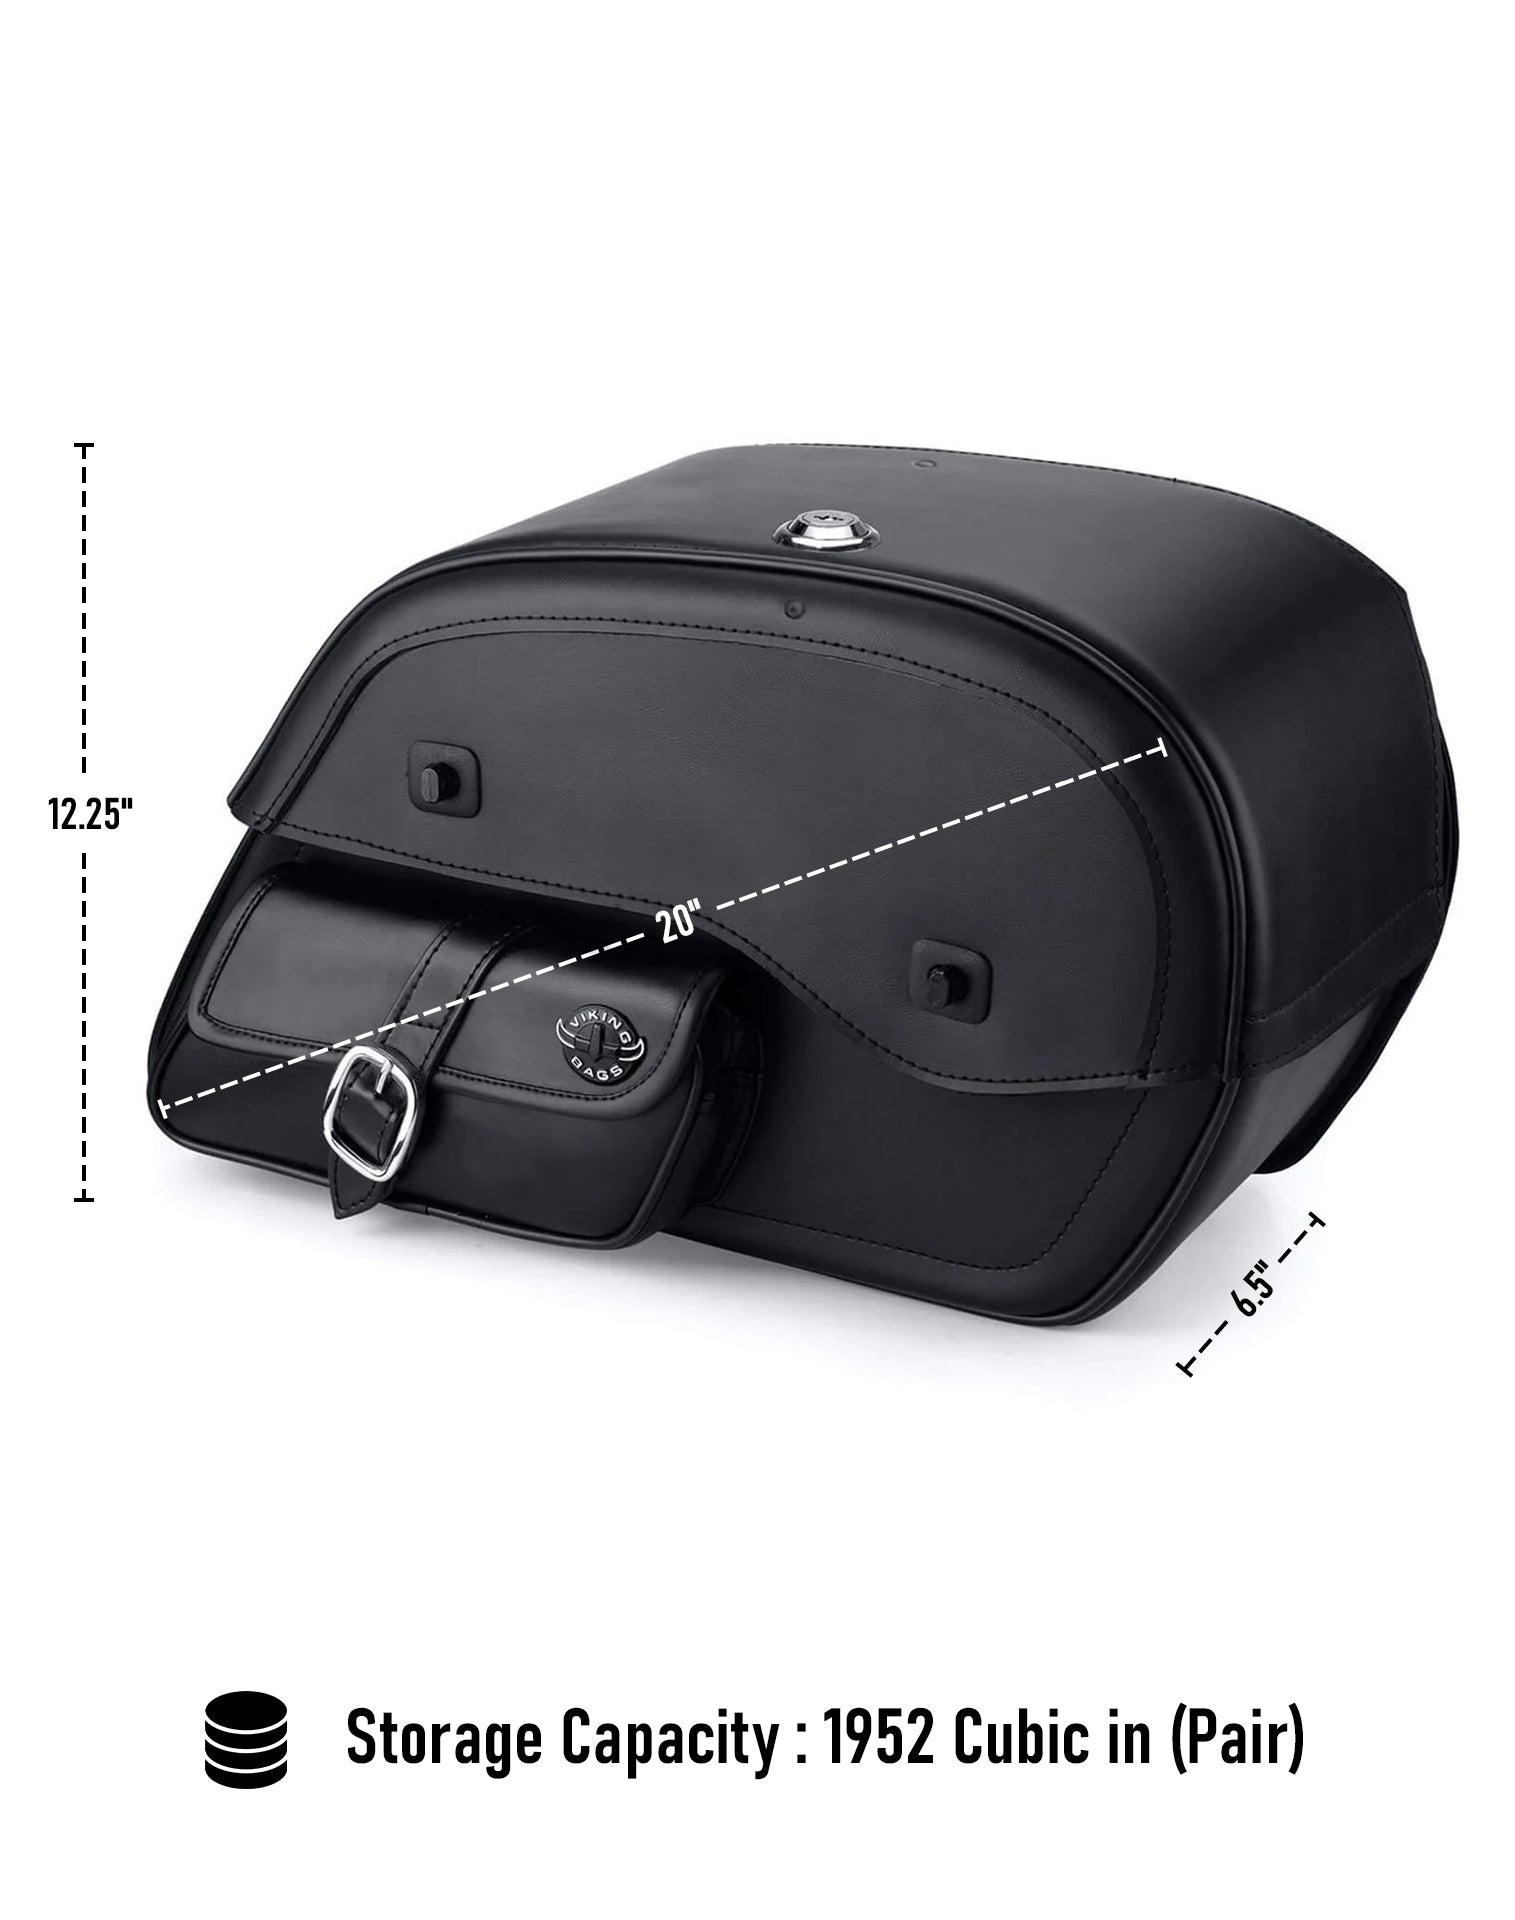 Viking Essential Side Pocket Large Kawasaki Vulcan S Leather Motorcycle Saddlebags Can Store Your Ridings Gears